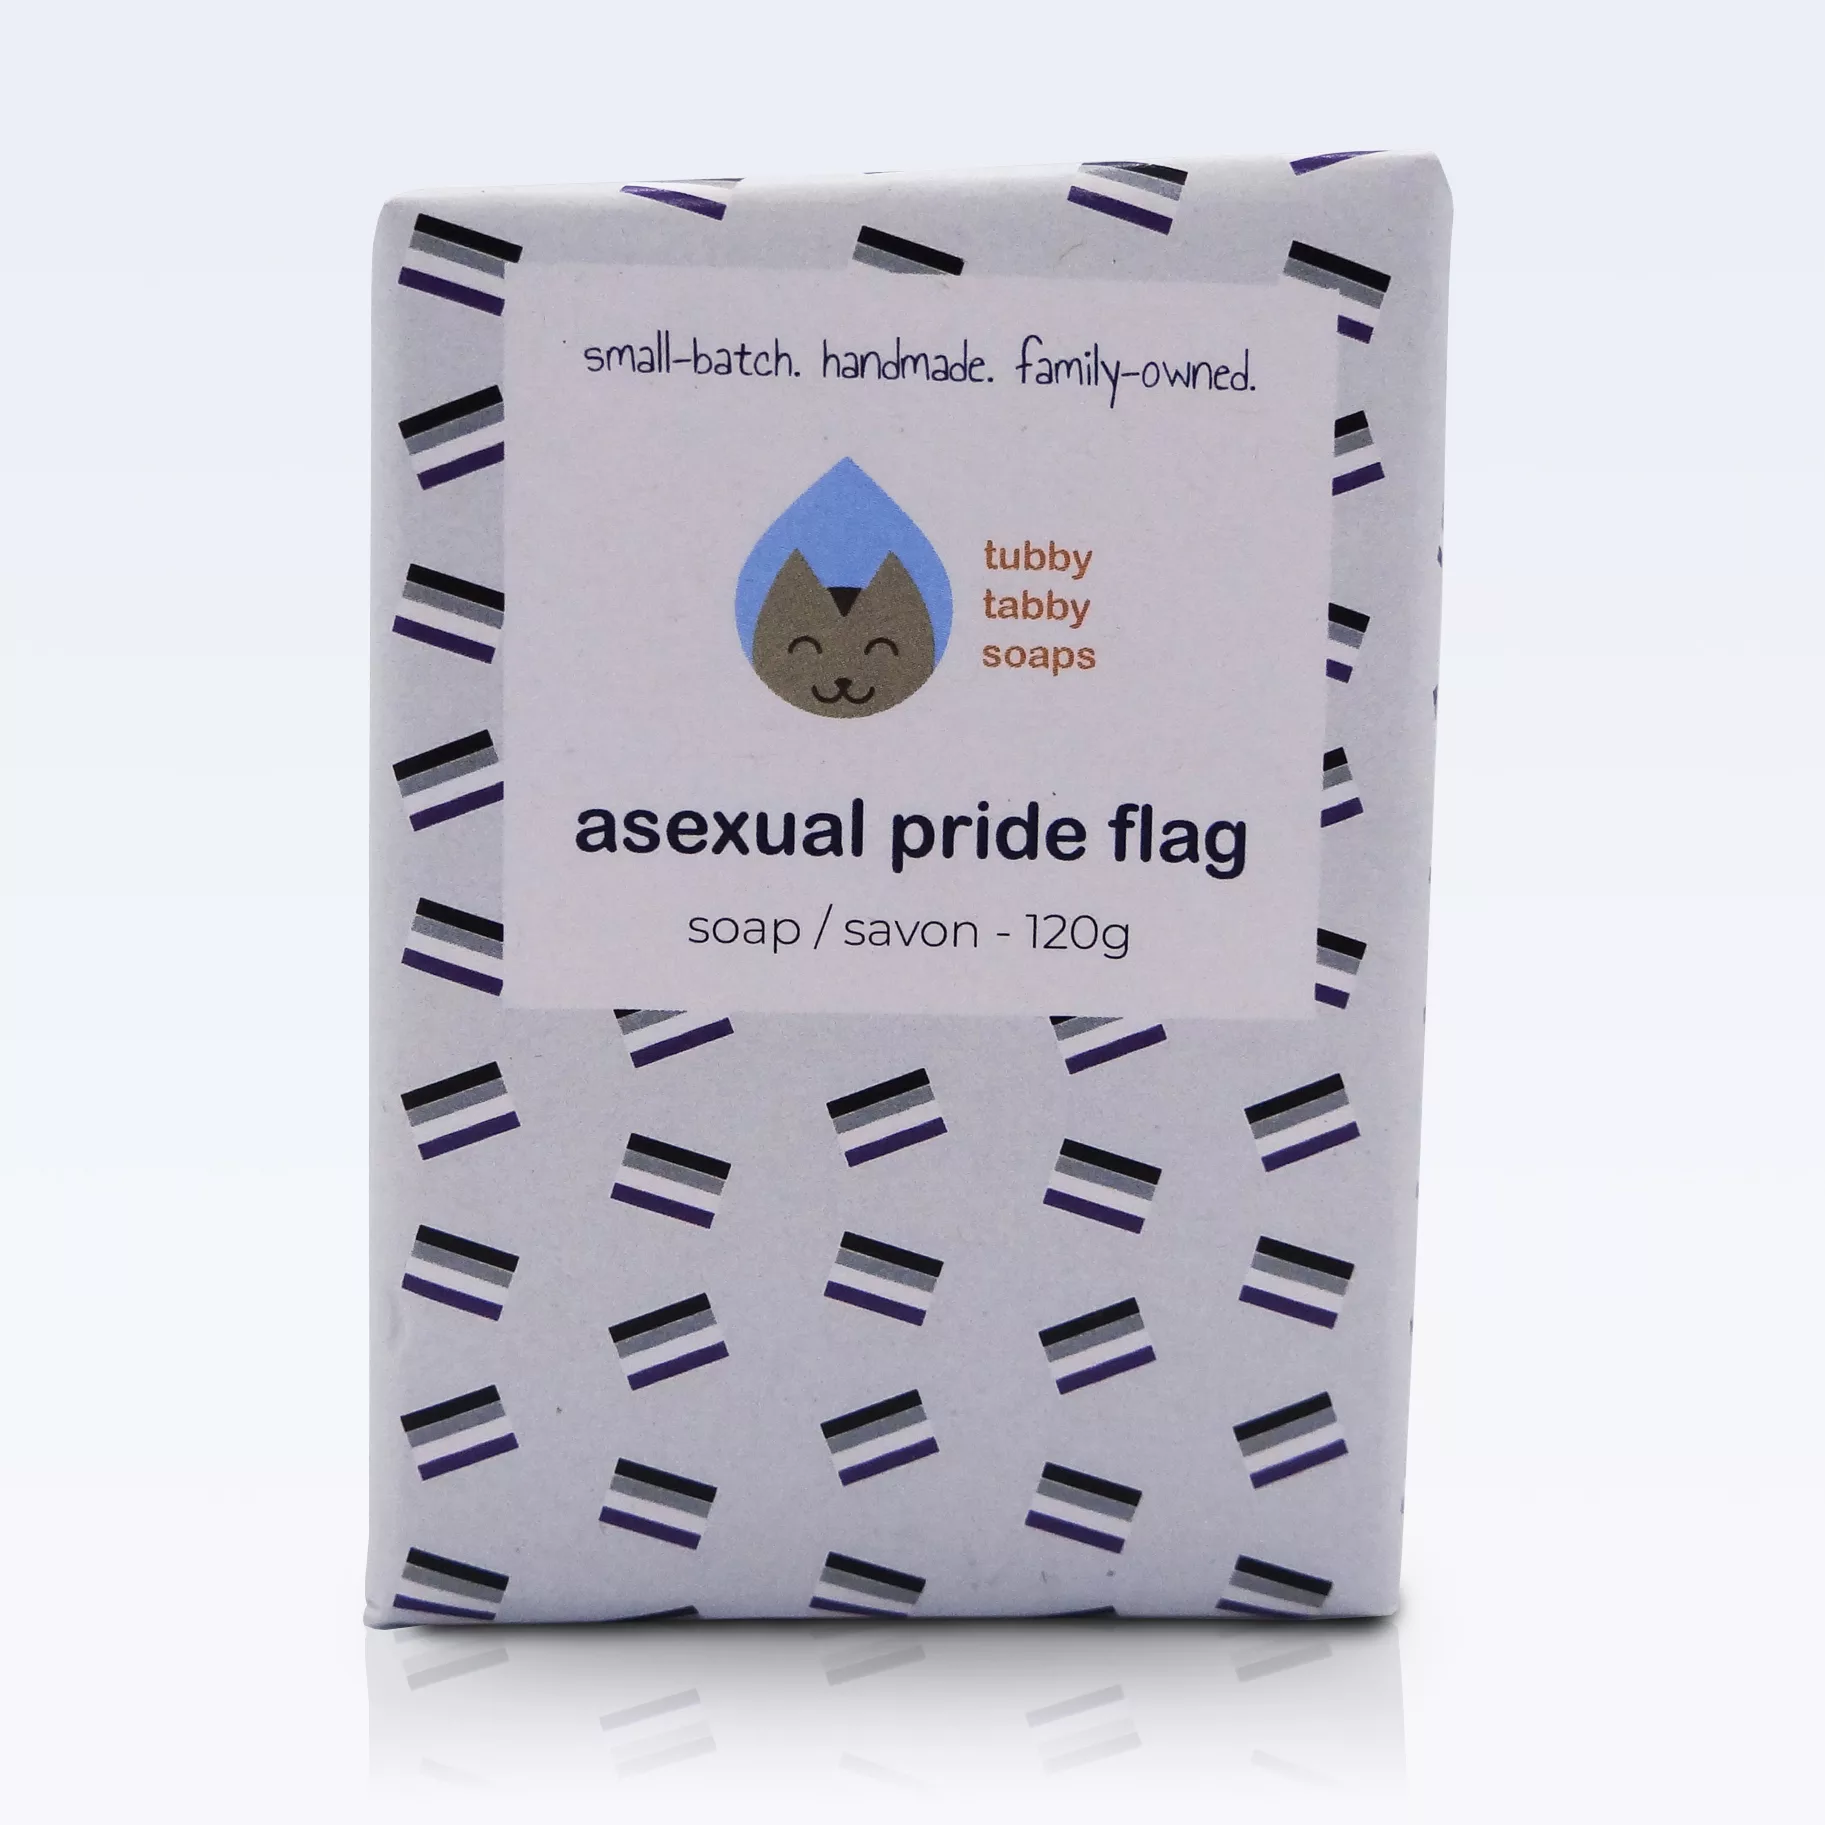 Asexual Pride Flag handmade soap by Tubby Tabby Soaps (wrapped)